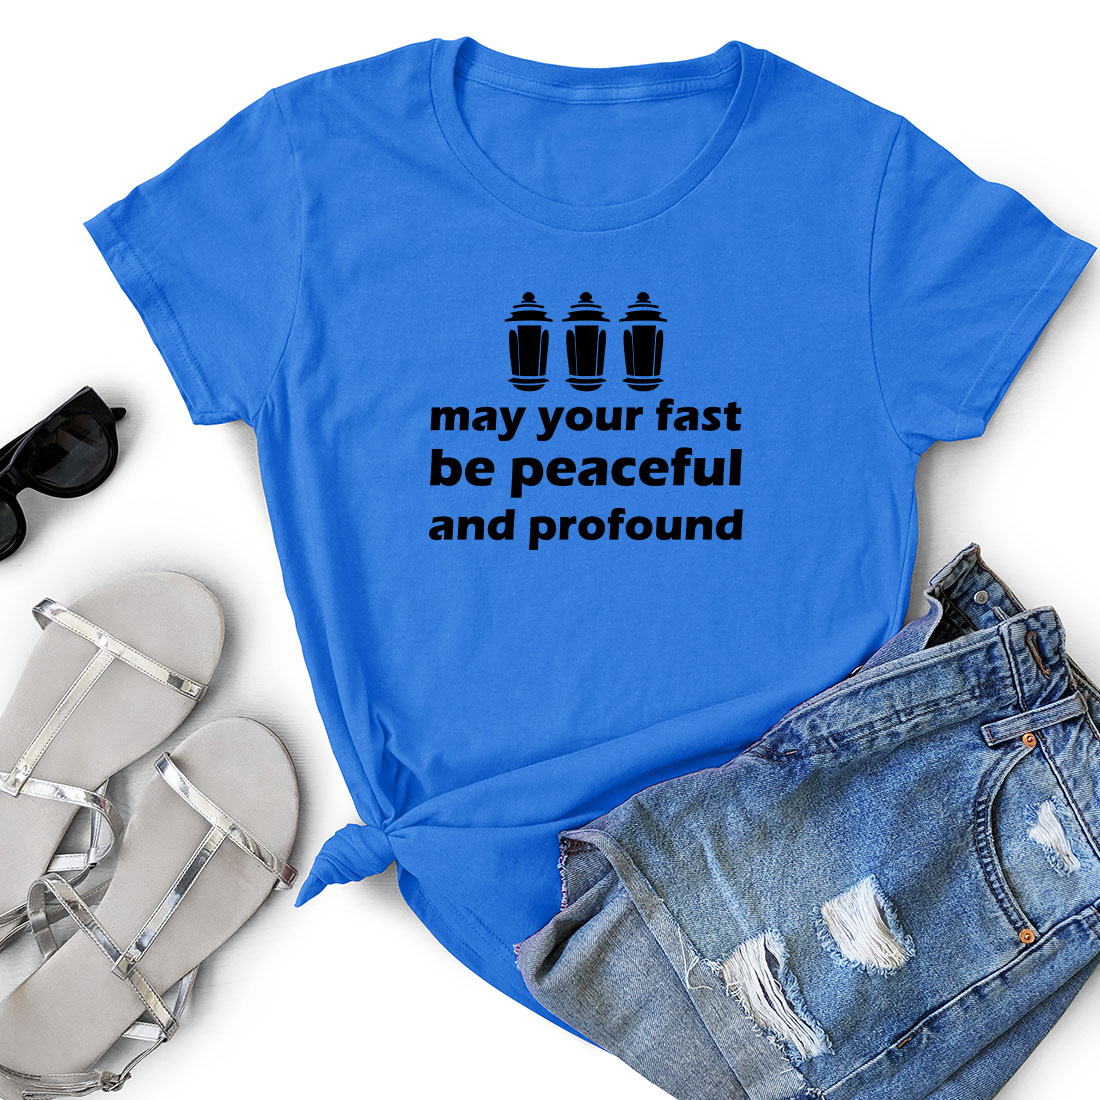 T - shirt that says may your fast be peaceful and profound.